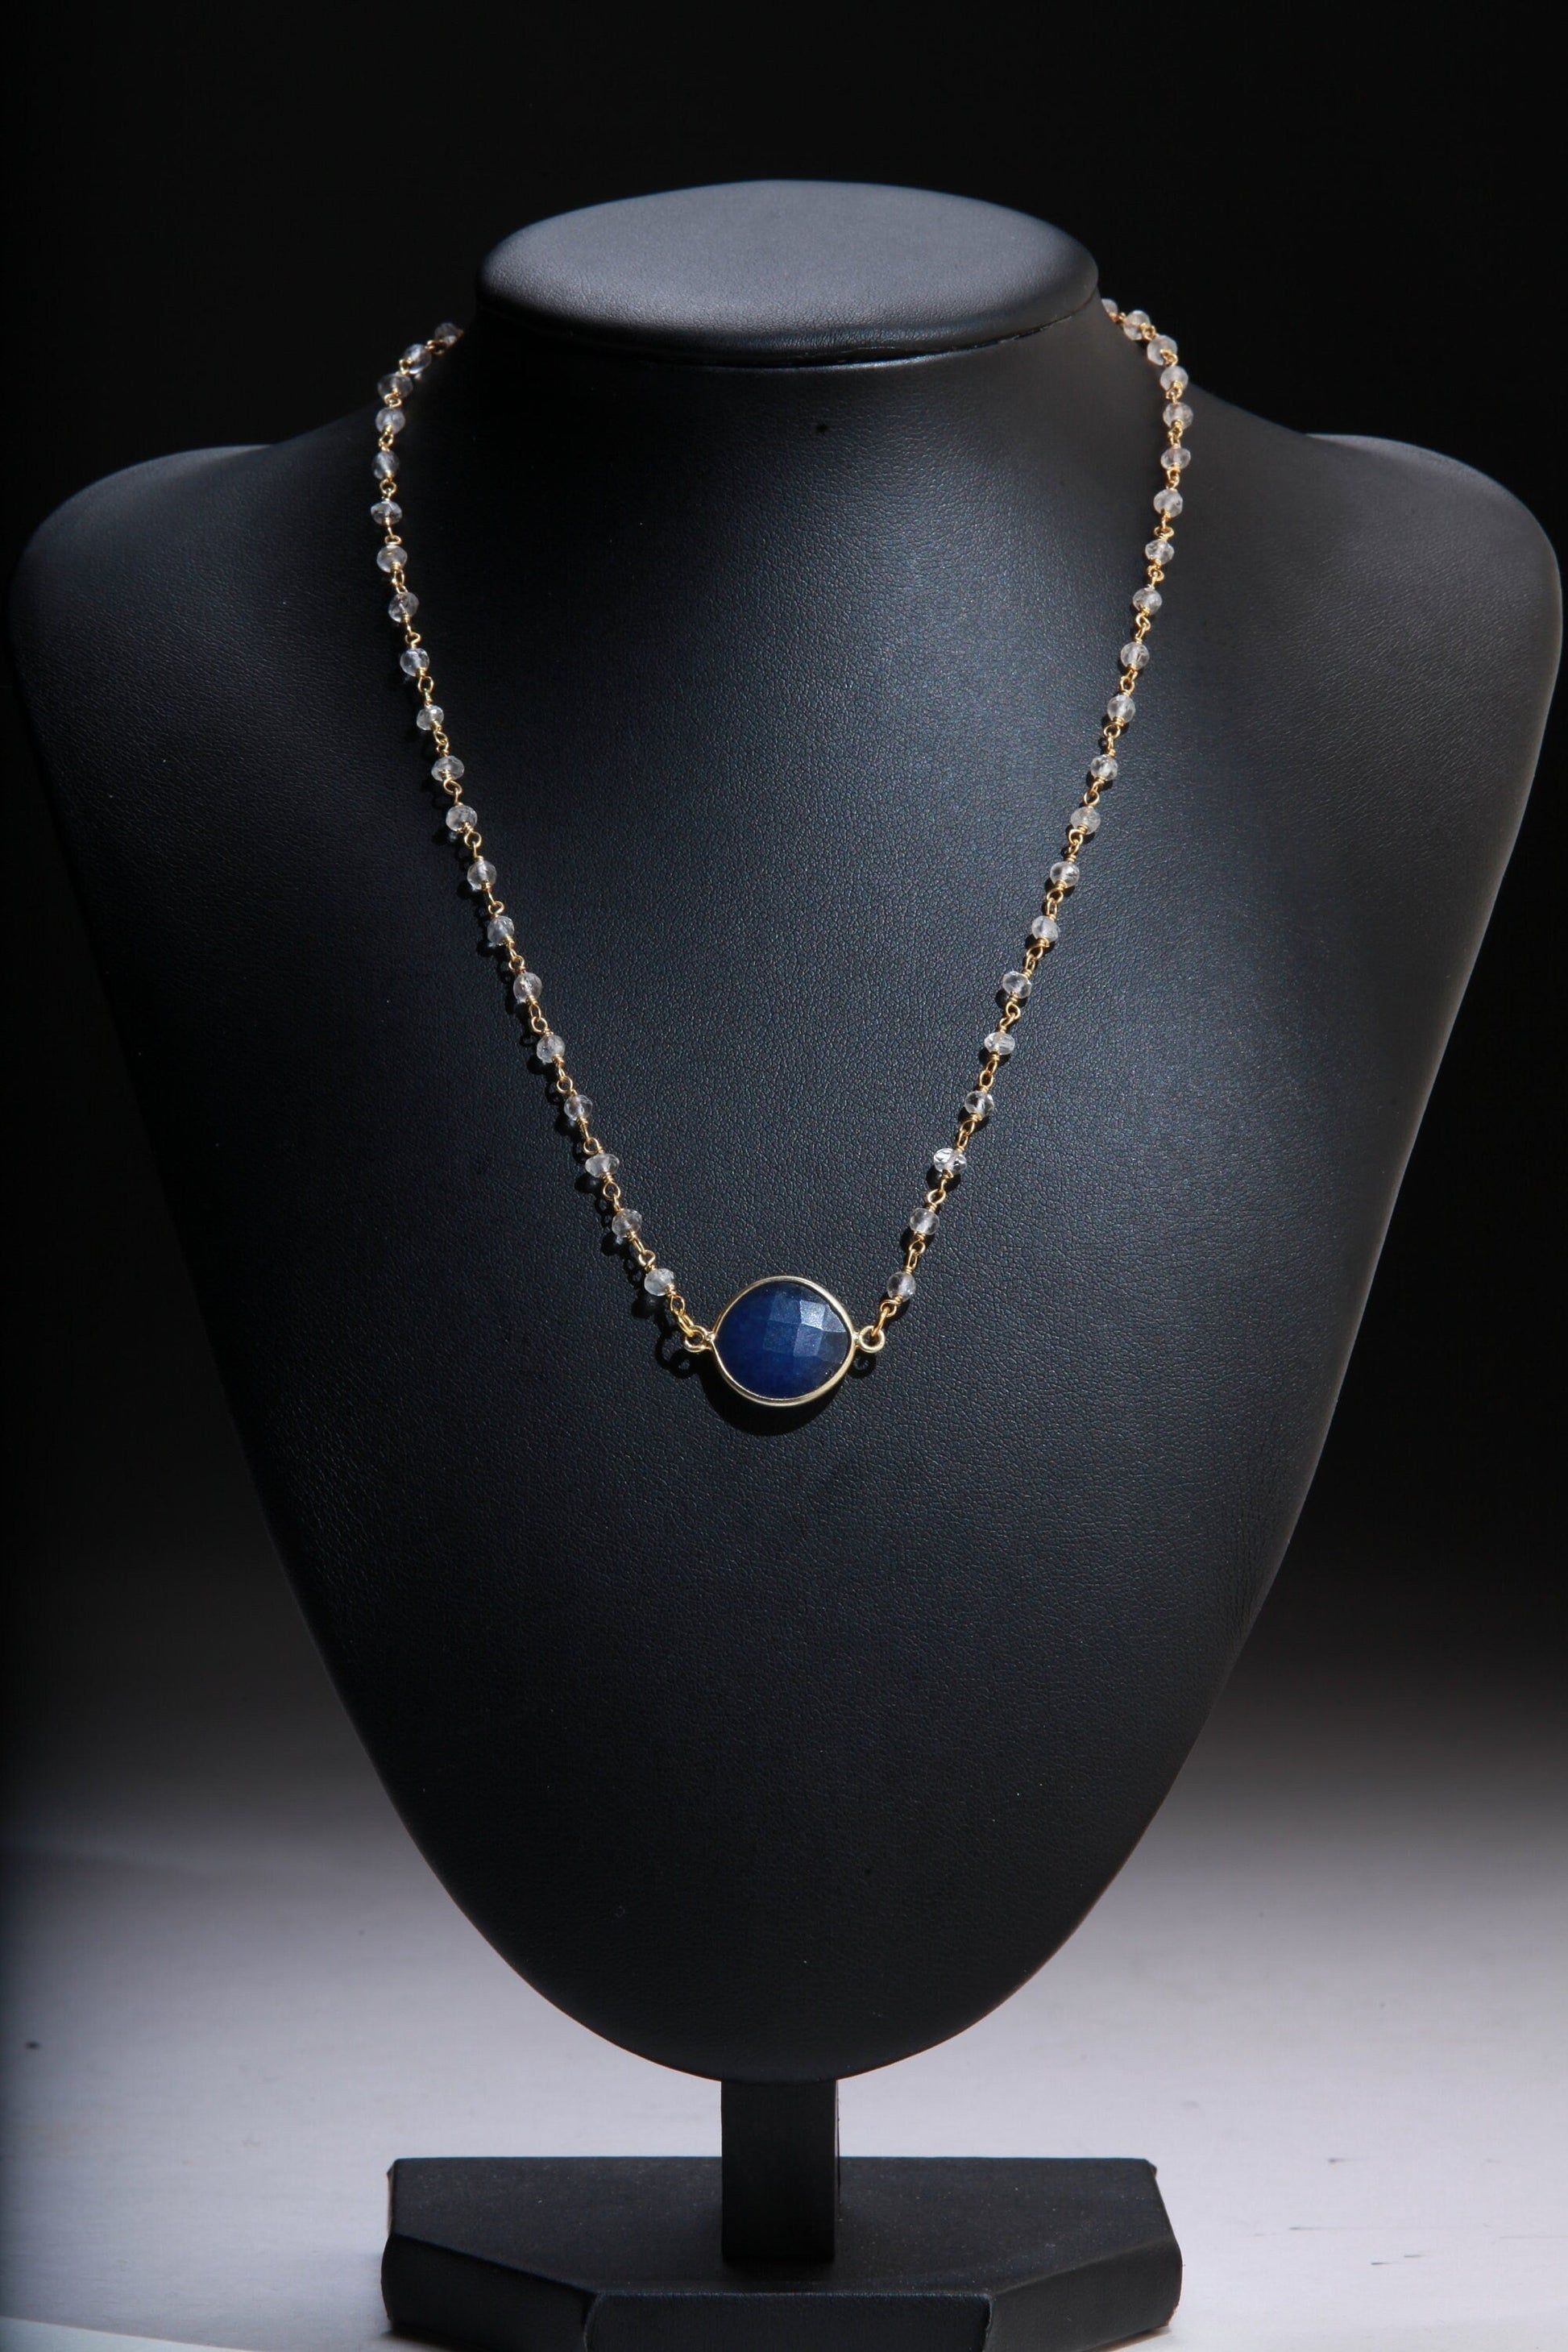 Sapphire Faceted Gold Bezel Pendant Necklace with Moonstone Beaded Rosary Chain 16&quot;to 24&quot; Necklace, September Birthstone, Girlfriend Gift